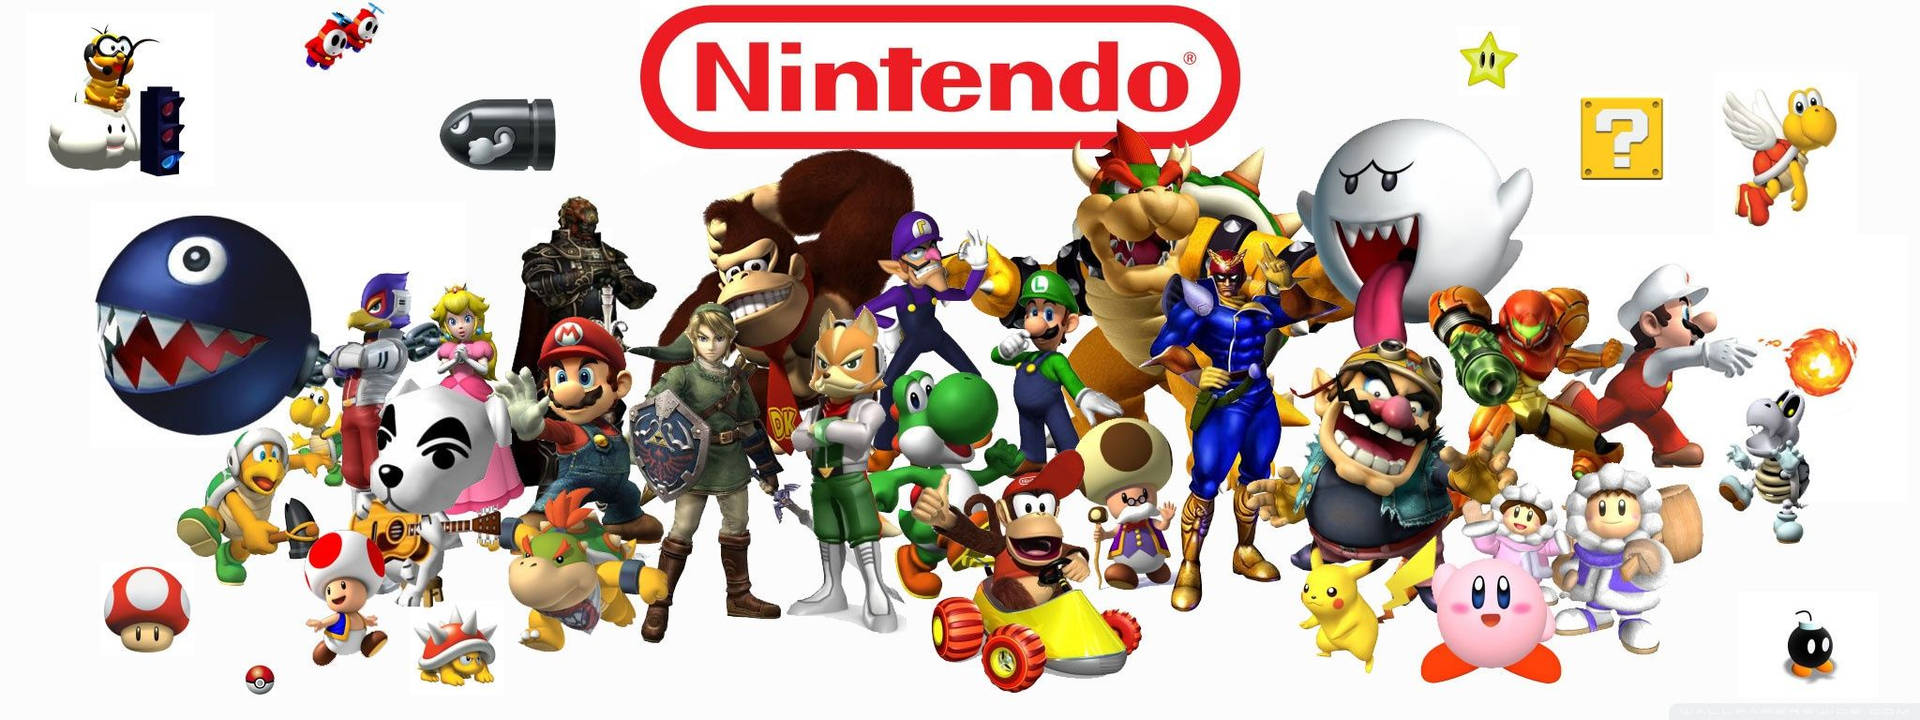 Nintendo Characters Picture